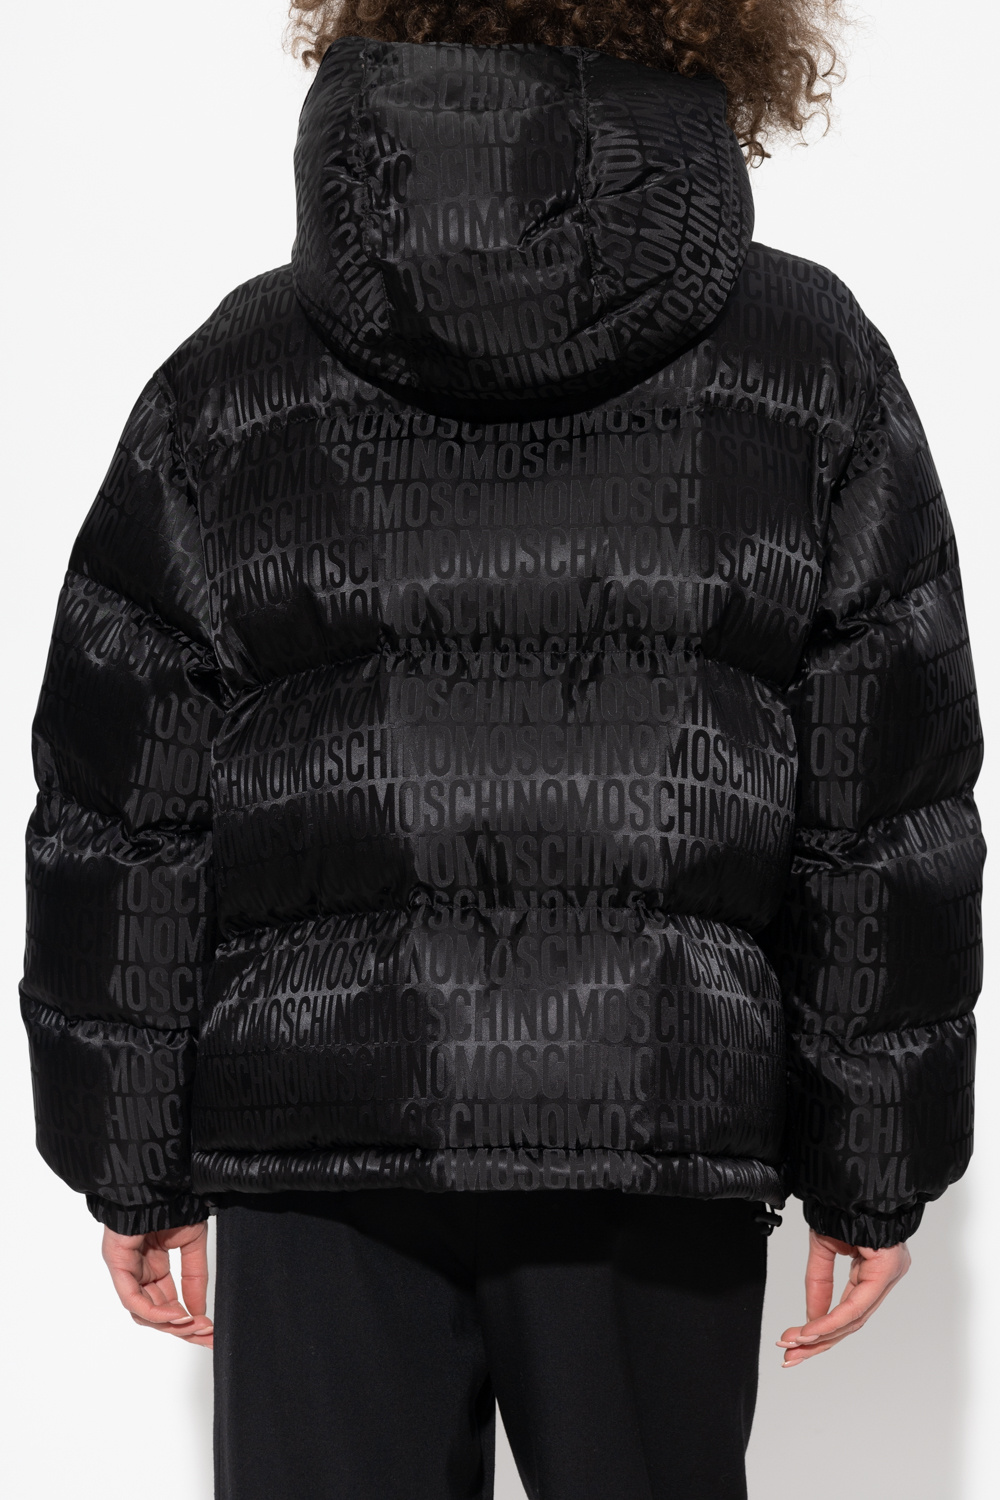 Moschino Quilted Contrast jacket with logo